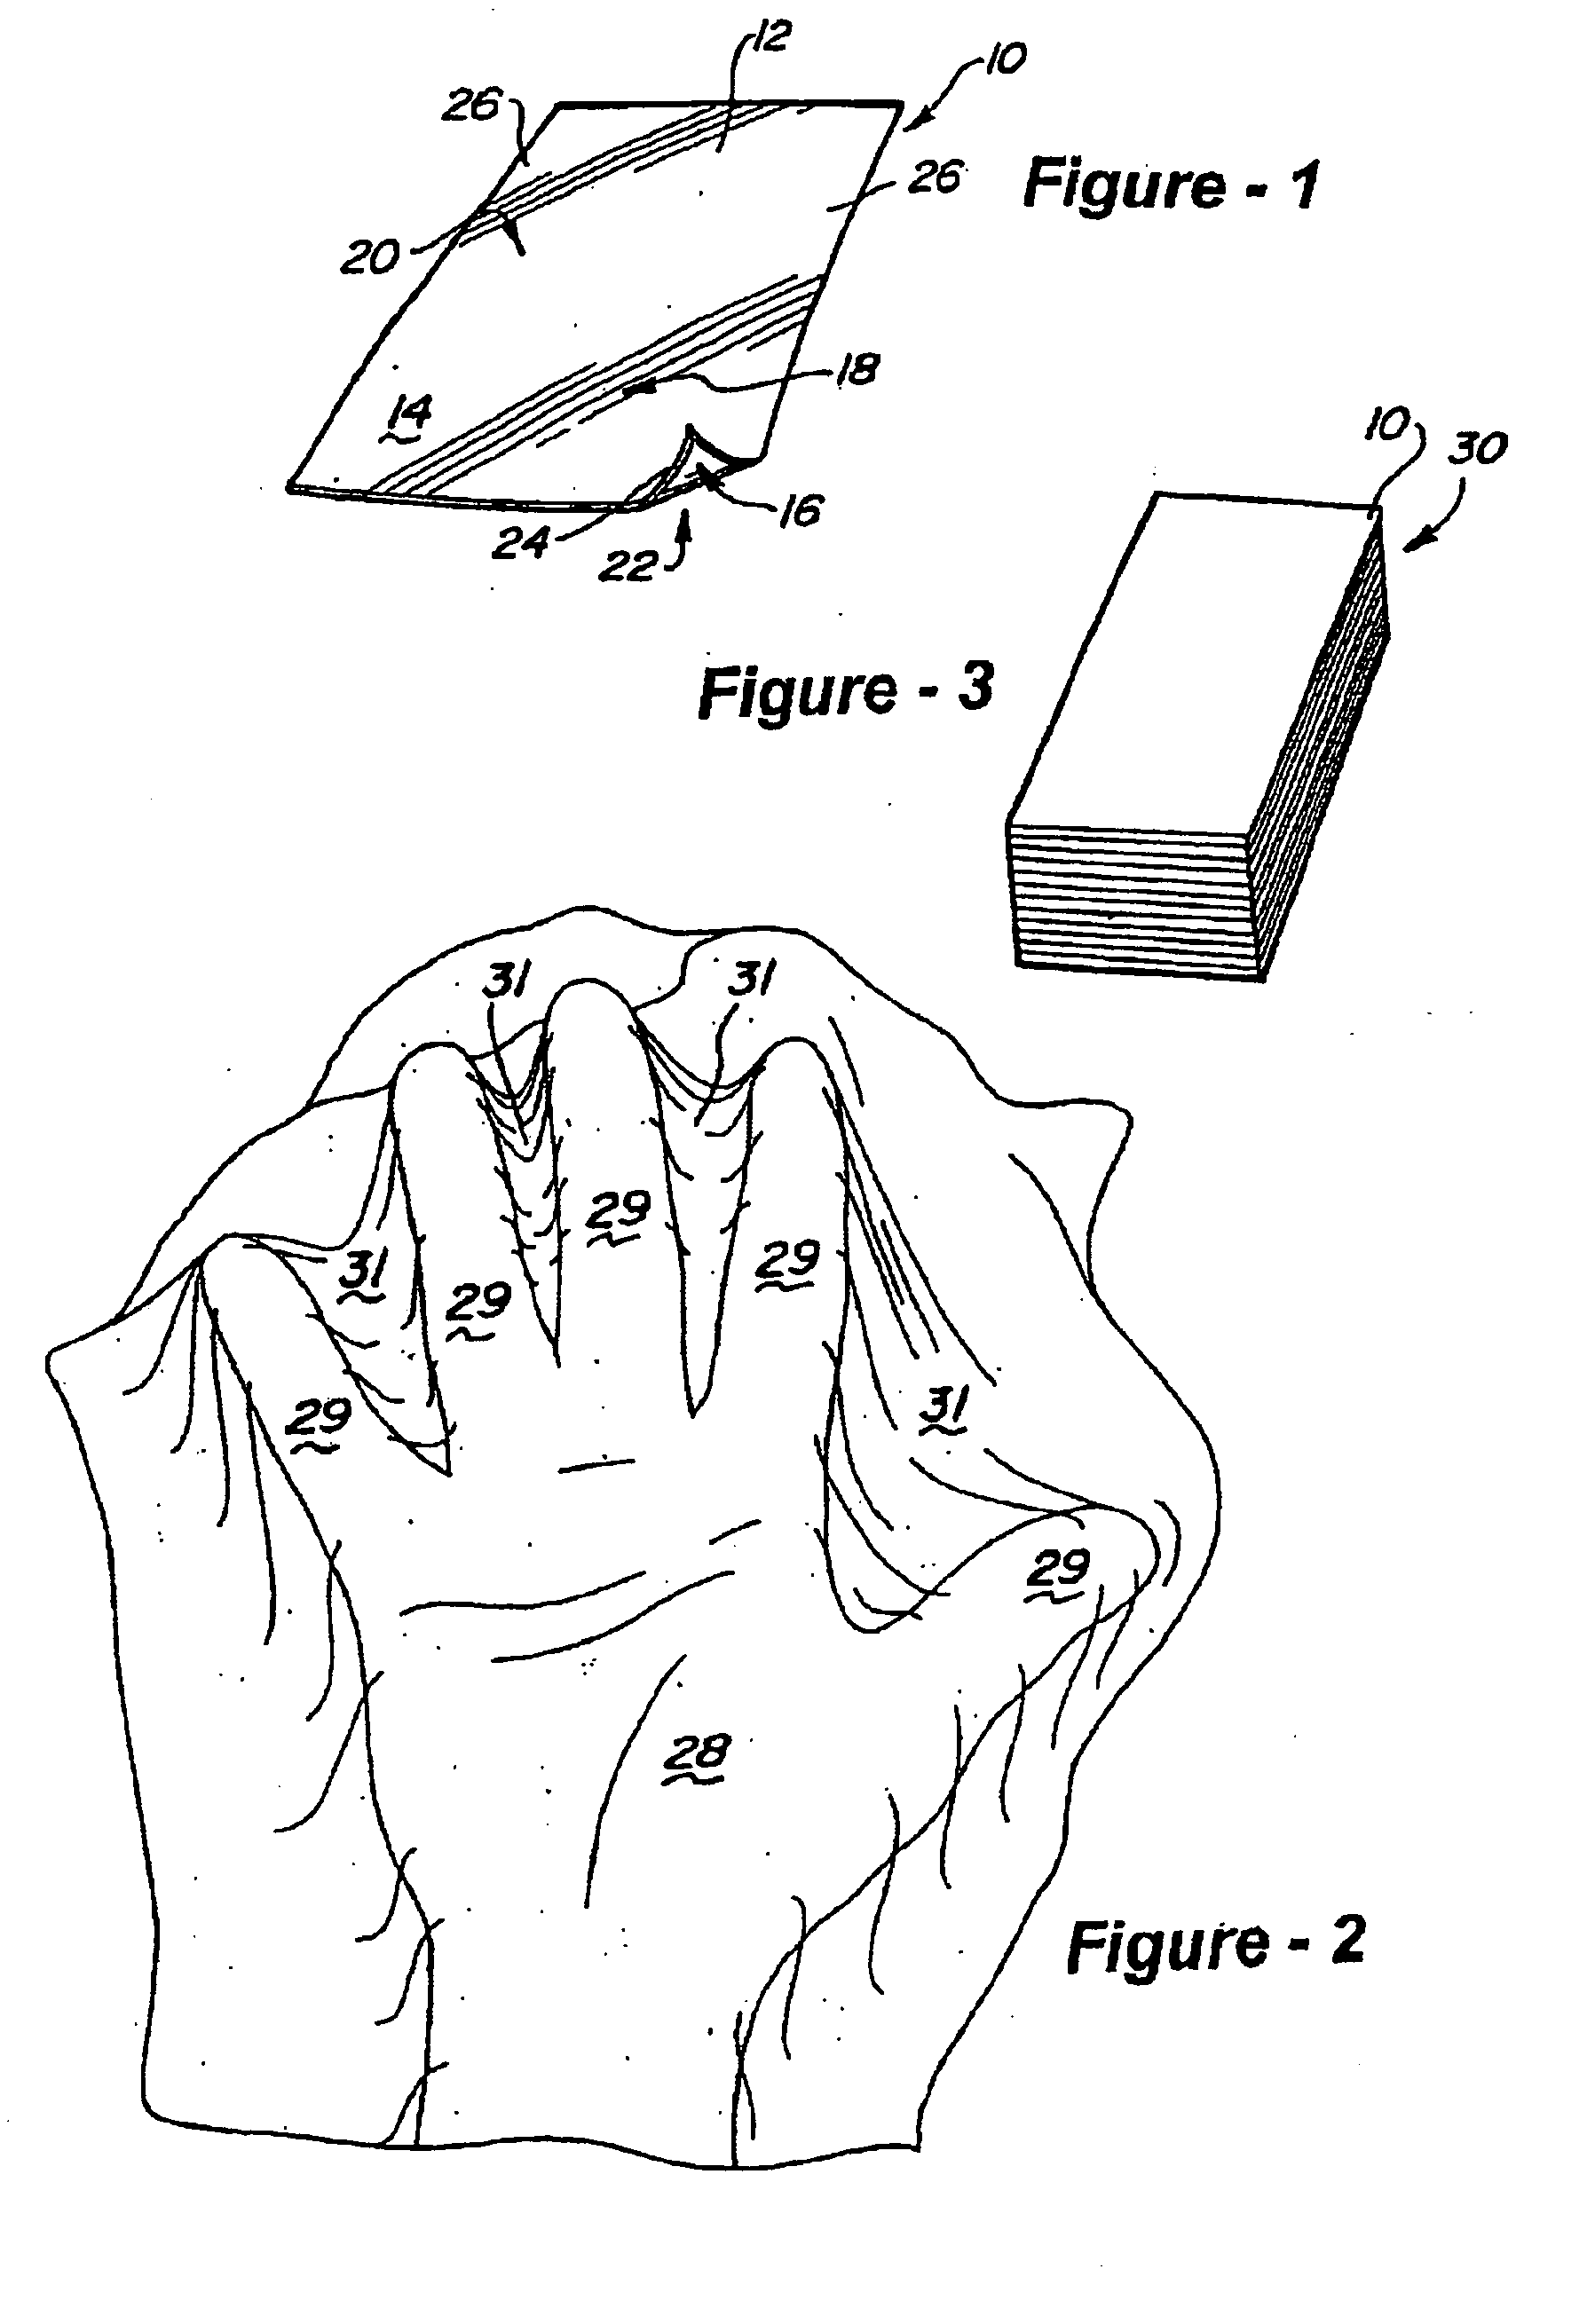 Protective hand covering and dispenser apparatus